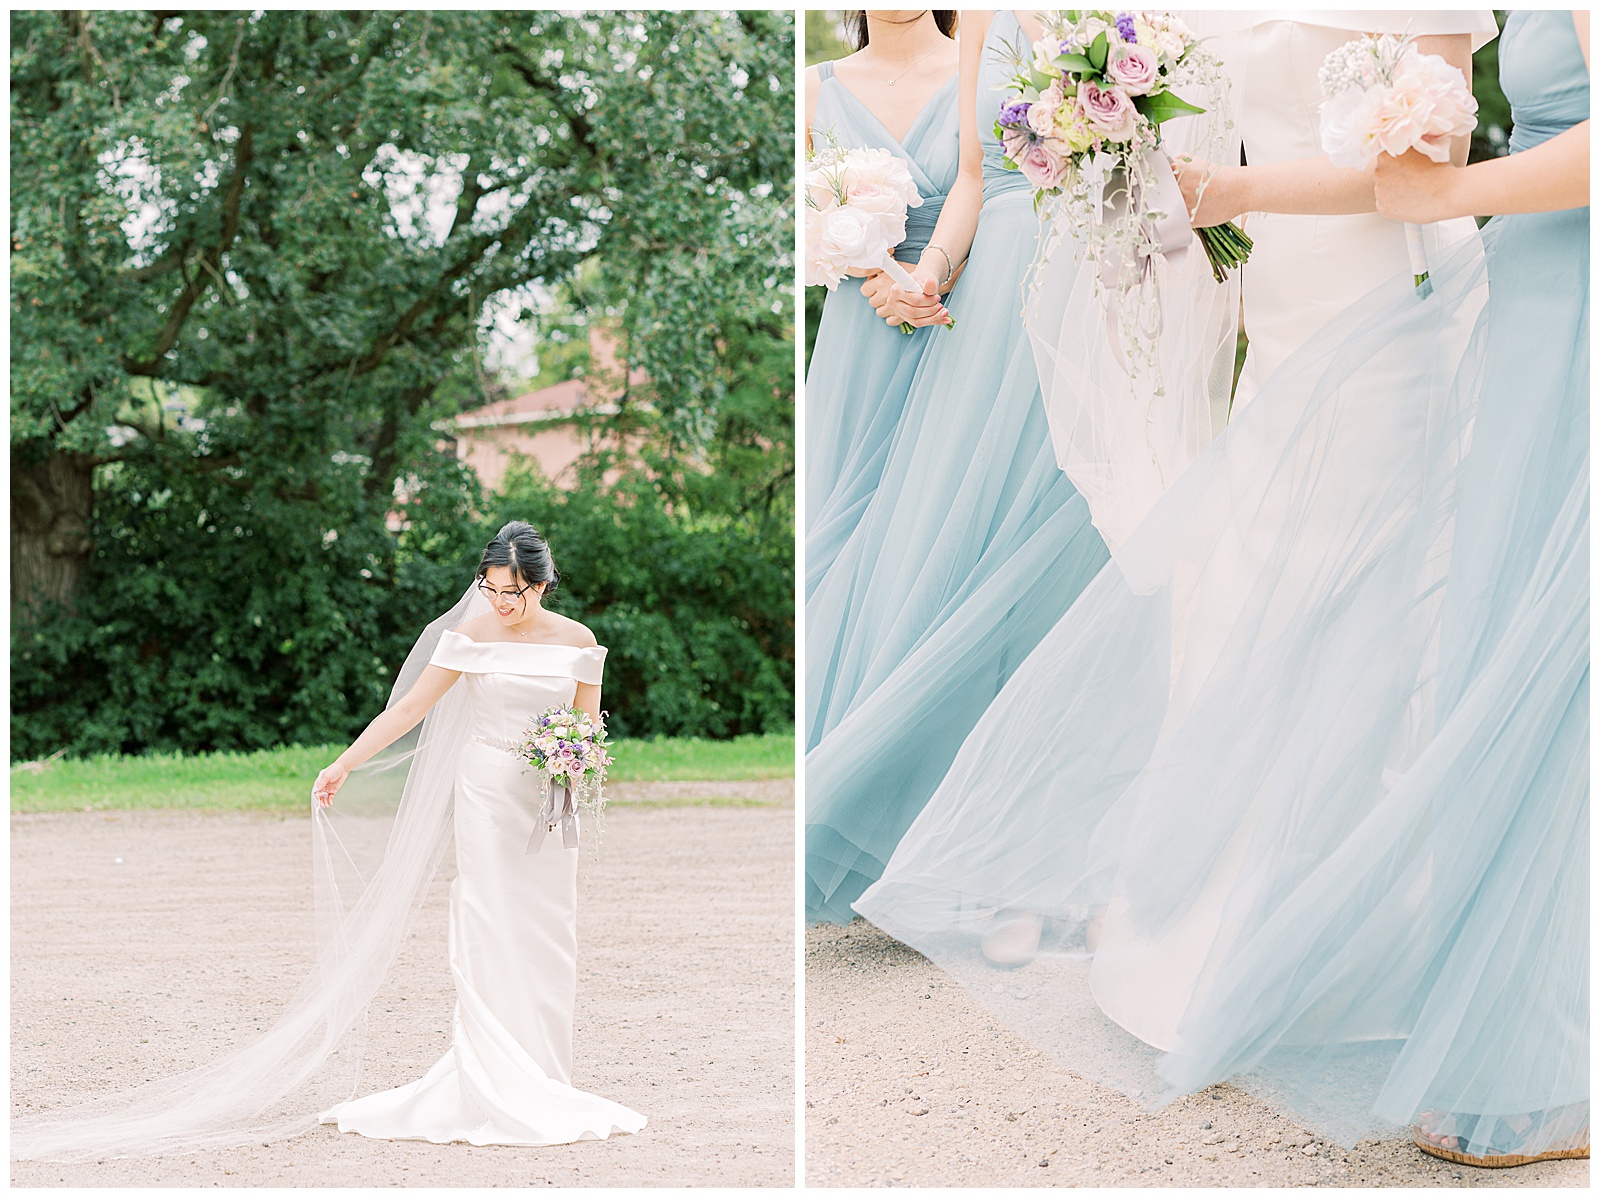 Bride with veil, bridemaids dresses blowing in wind